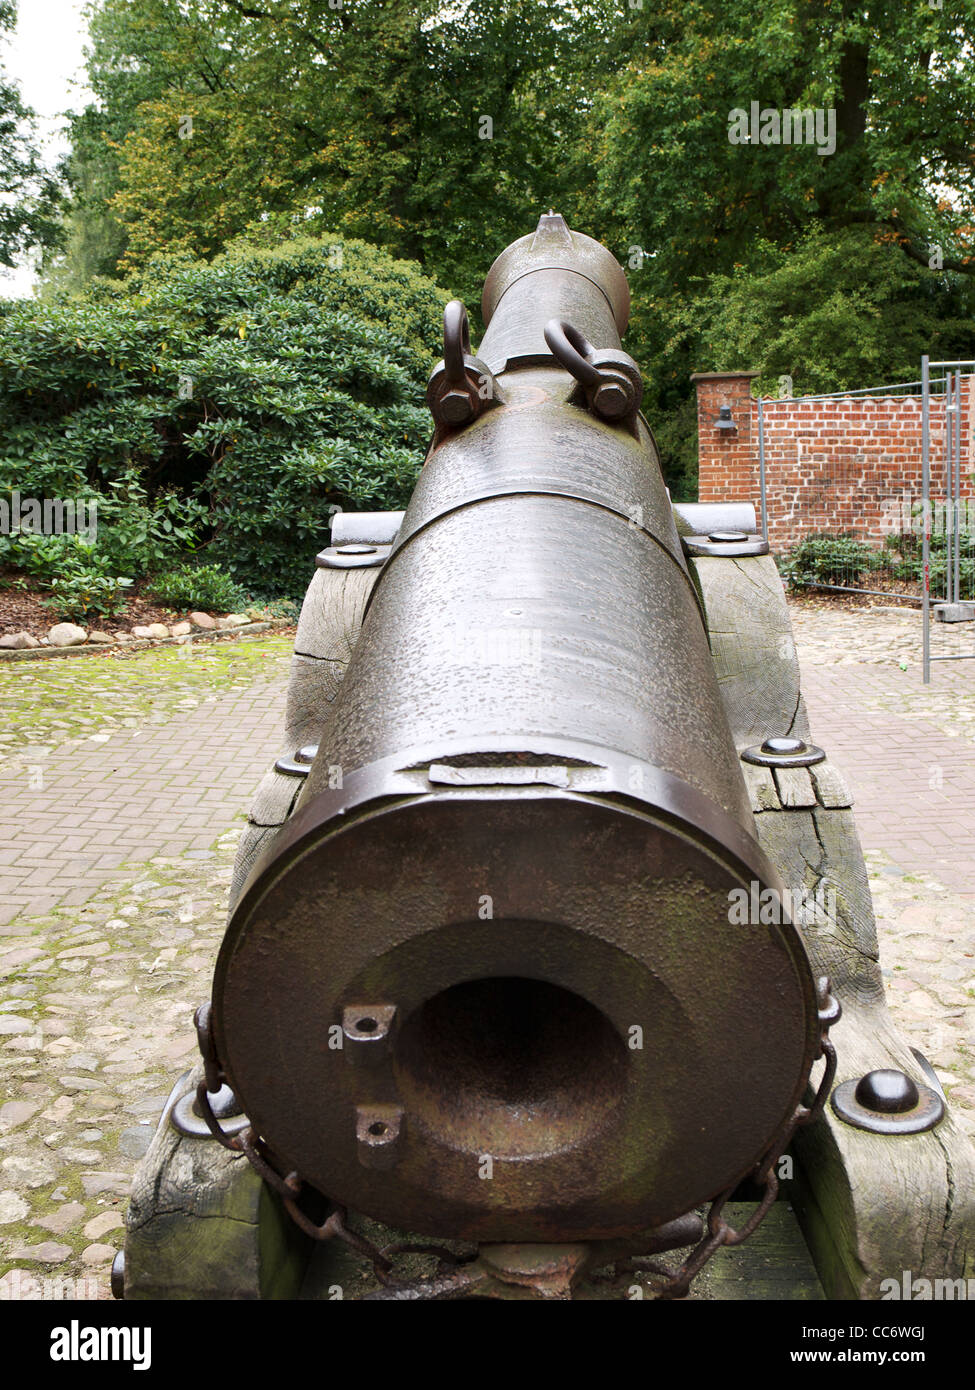 Cannon on the court of Winsen Castle, Winsen Luhe, Germany. Stock Photo